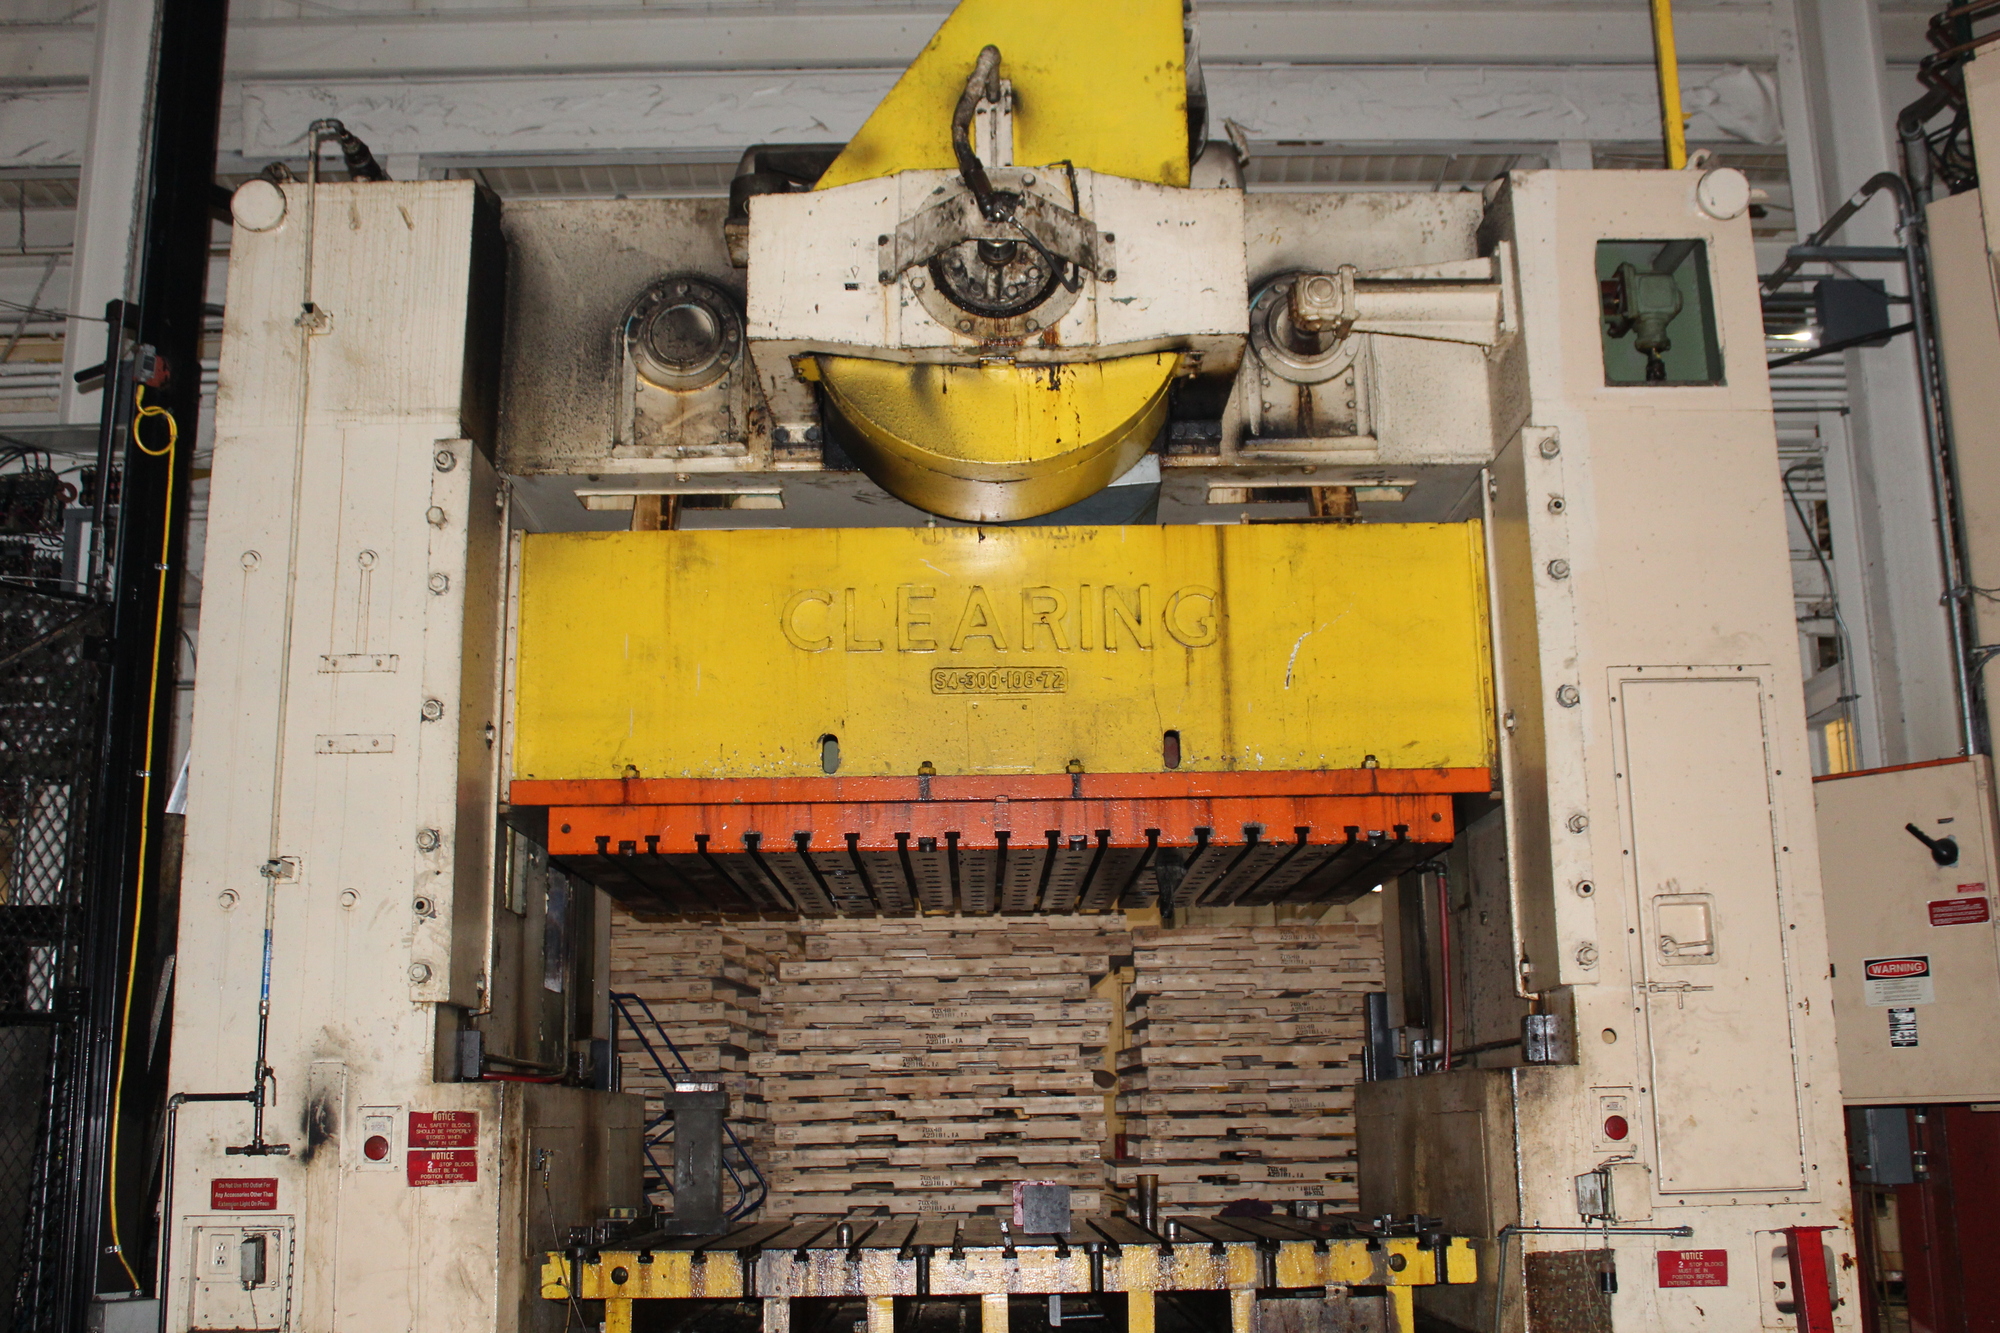 Clearing S4-300-108-72 Straight Side Press | Levy Recovery Group